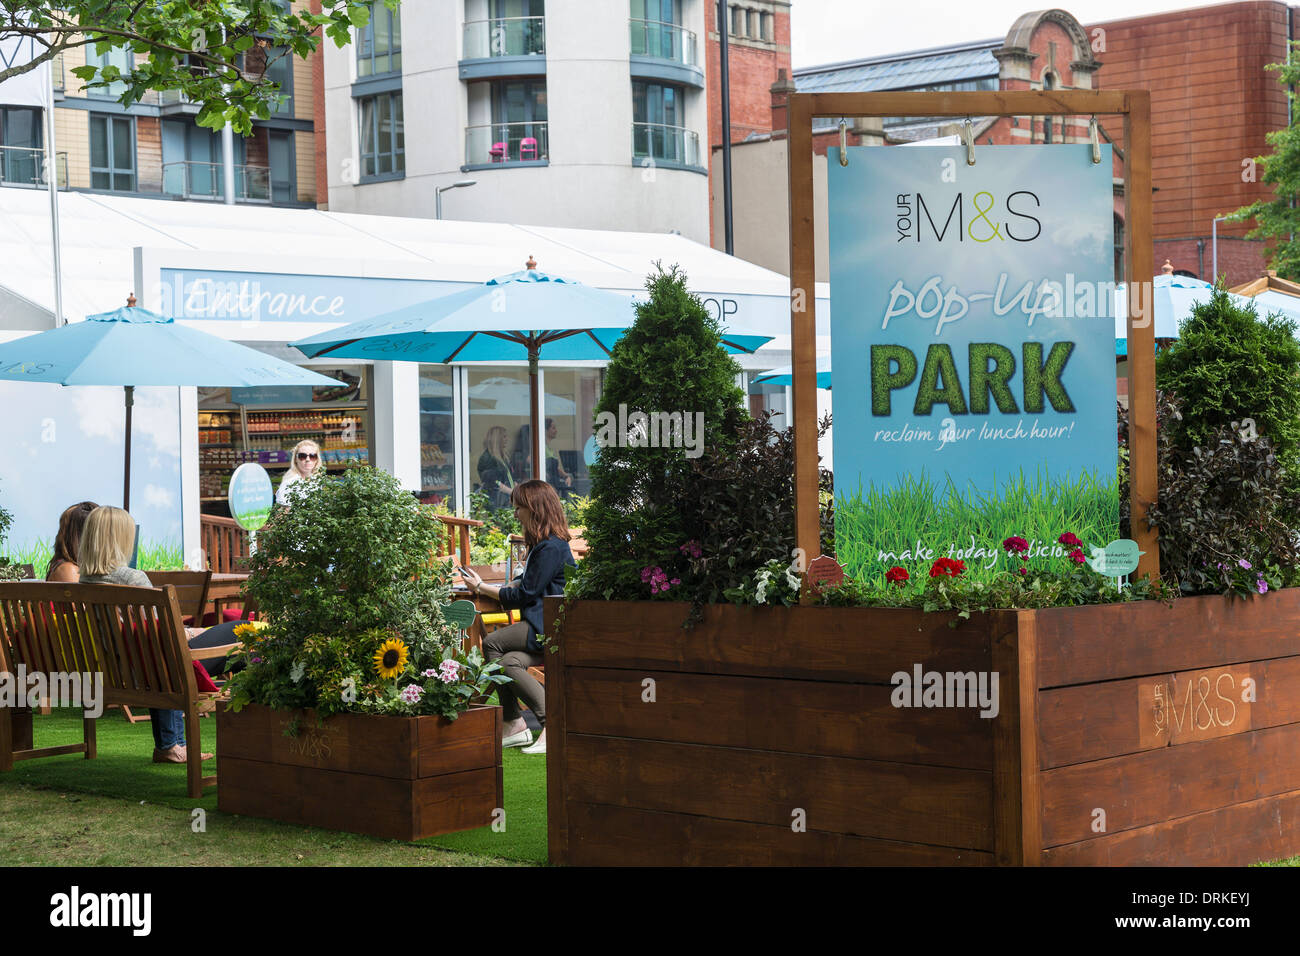 M&S pop up retail store, Manchester, England Stock Photo